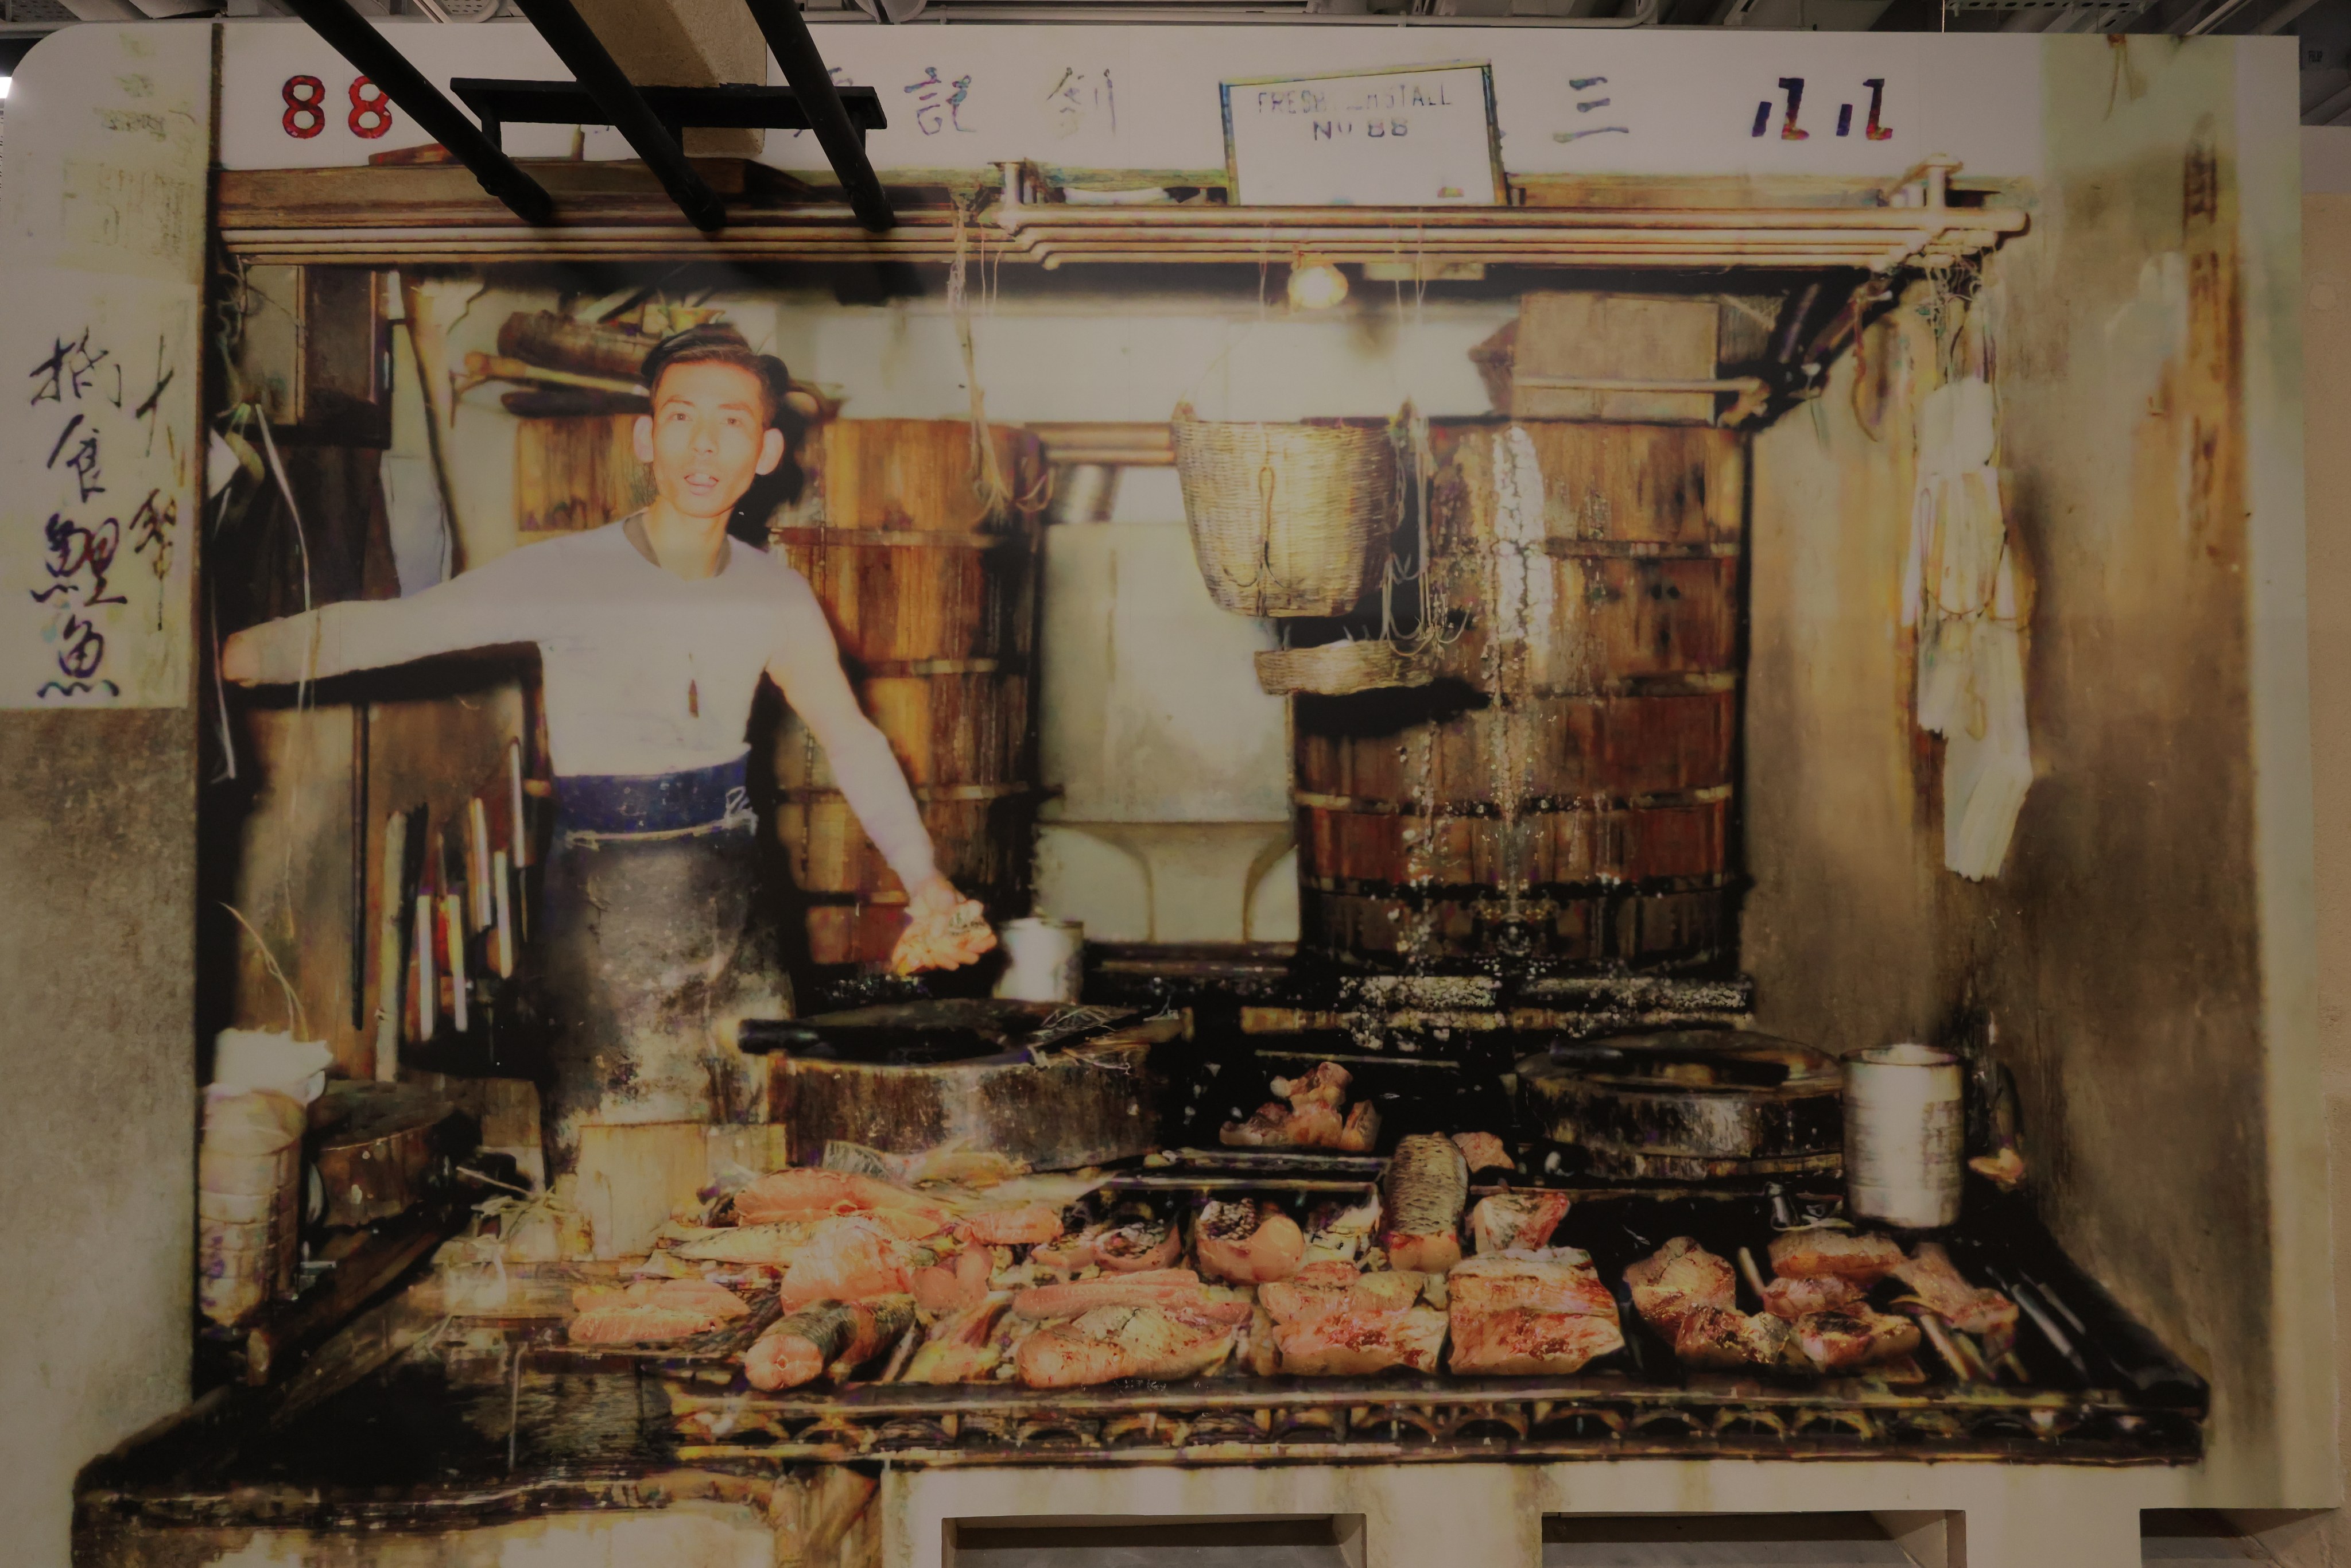 A team of artists working for the Urban Renewal Authority has restored a 1950s photo using AI-based software and turned it into a display at the Central Market. Photo: Jelly Tse